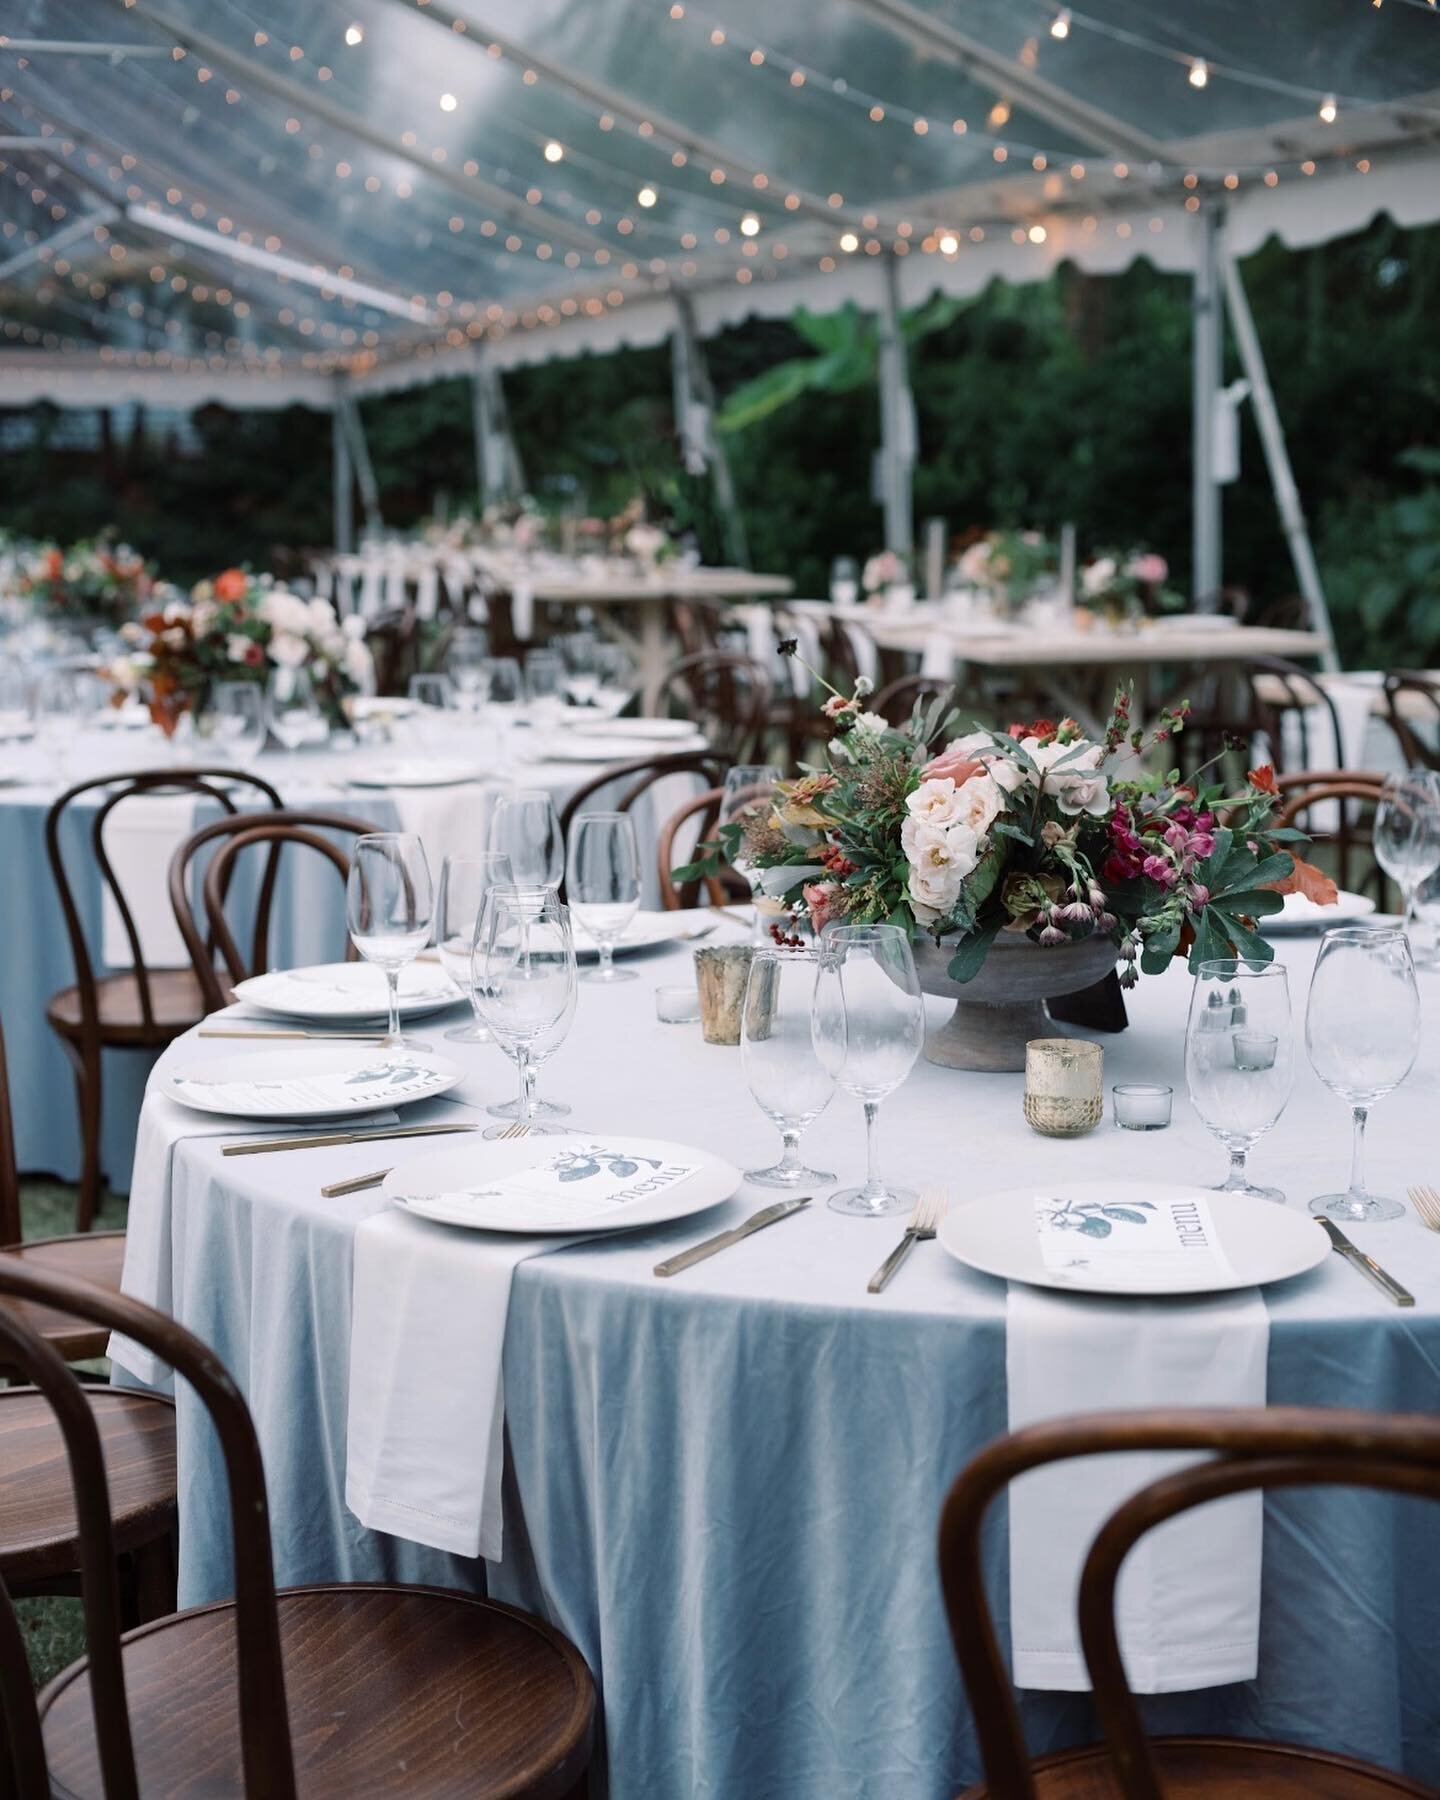 A tented garden, with tables set for 100 guests to dine under twinkly lights, sets the most inviting environment for a celebration. 

@jordanmikalphotography